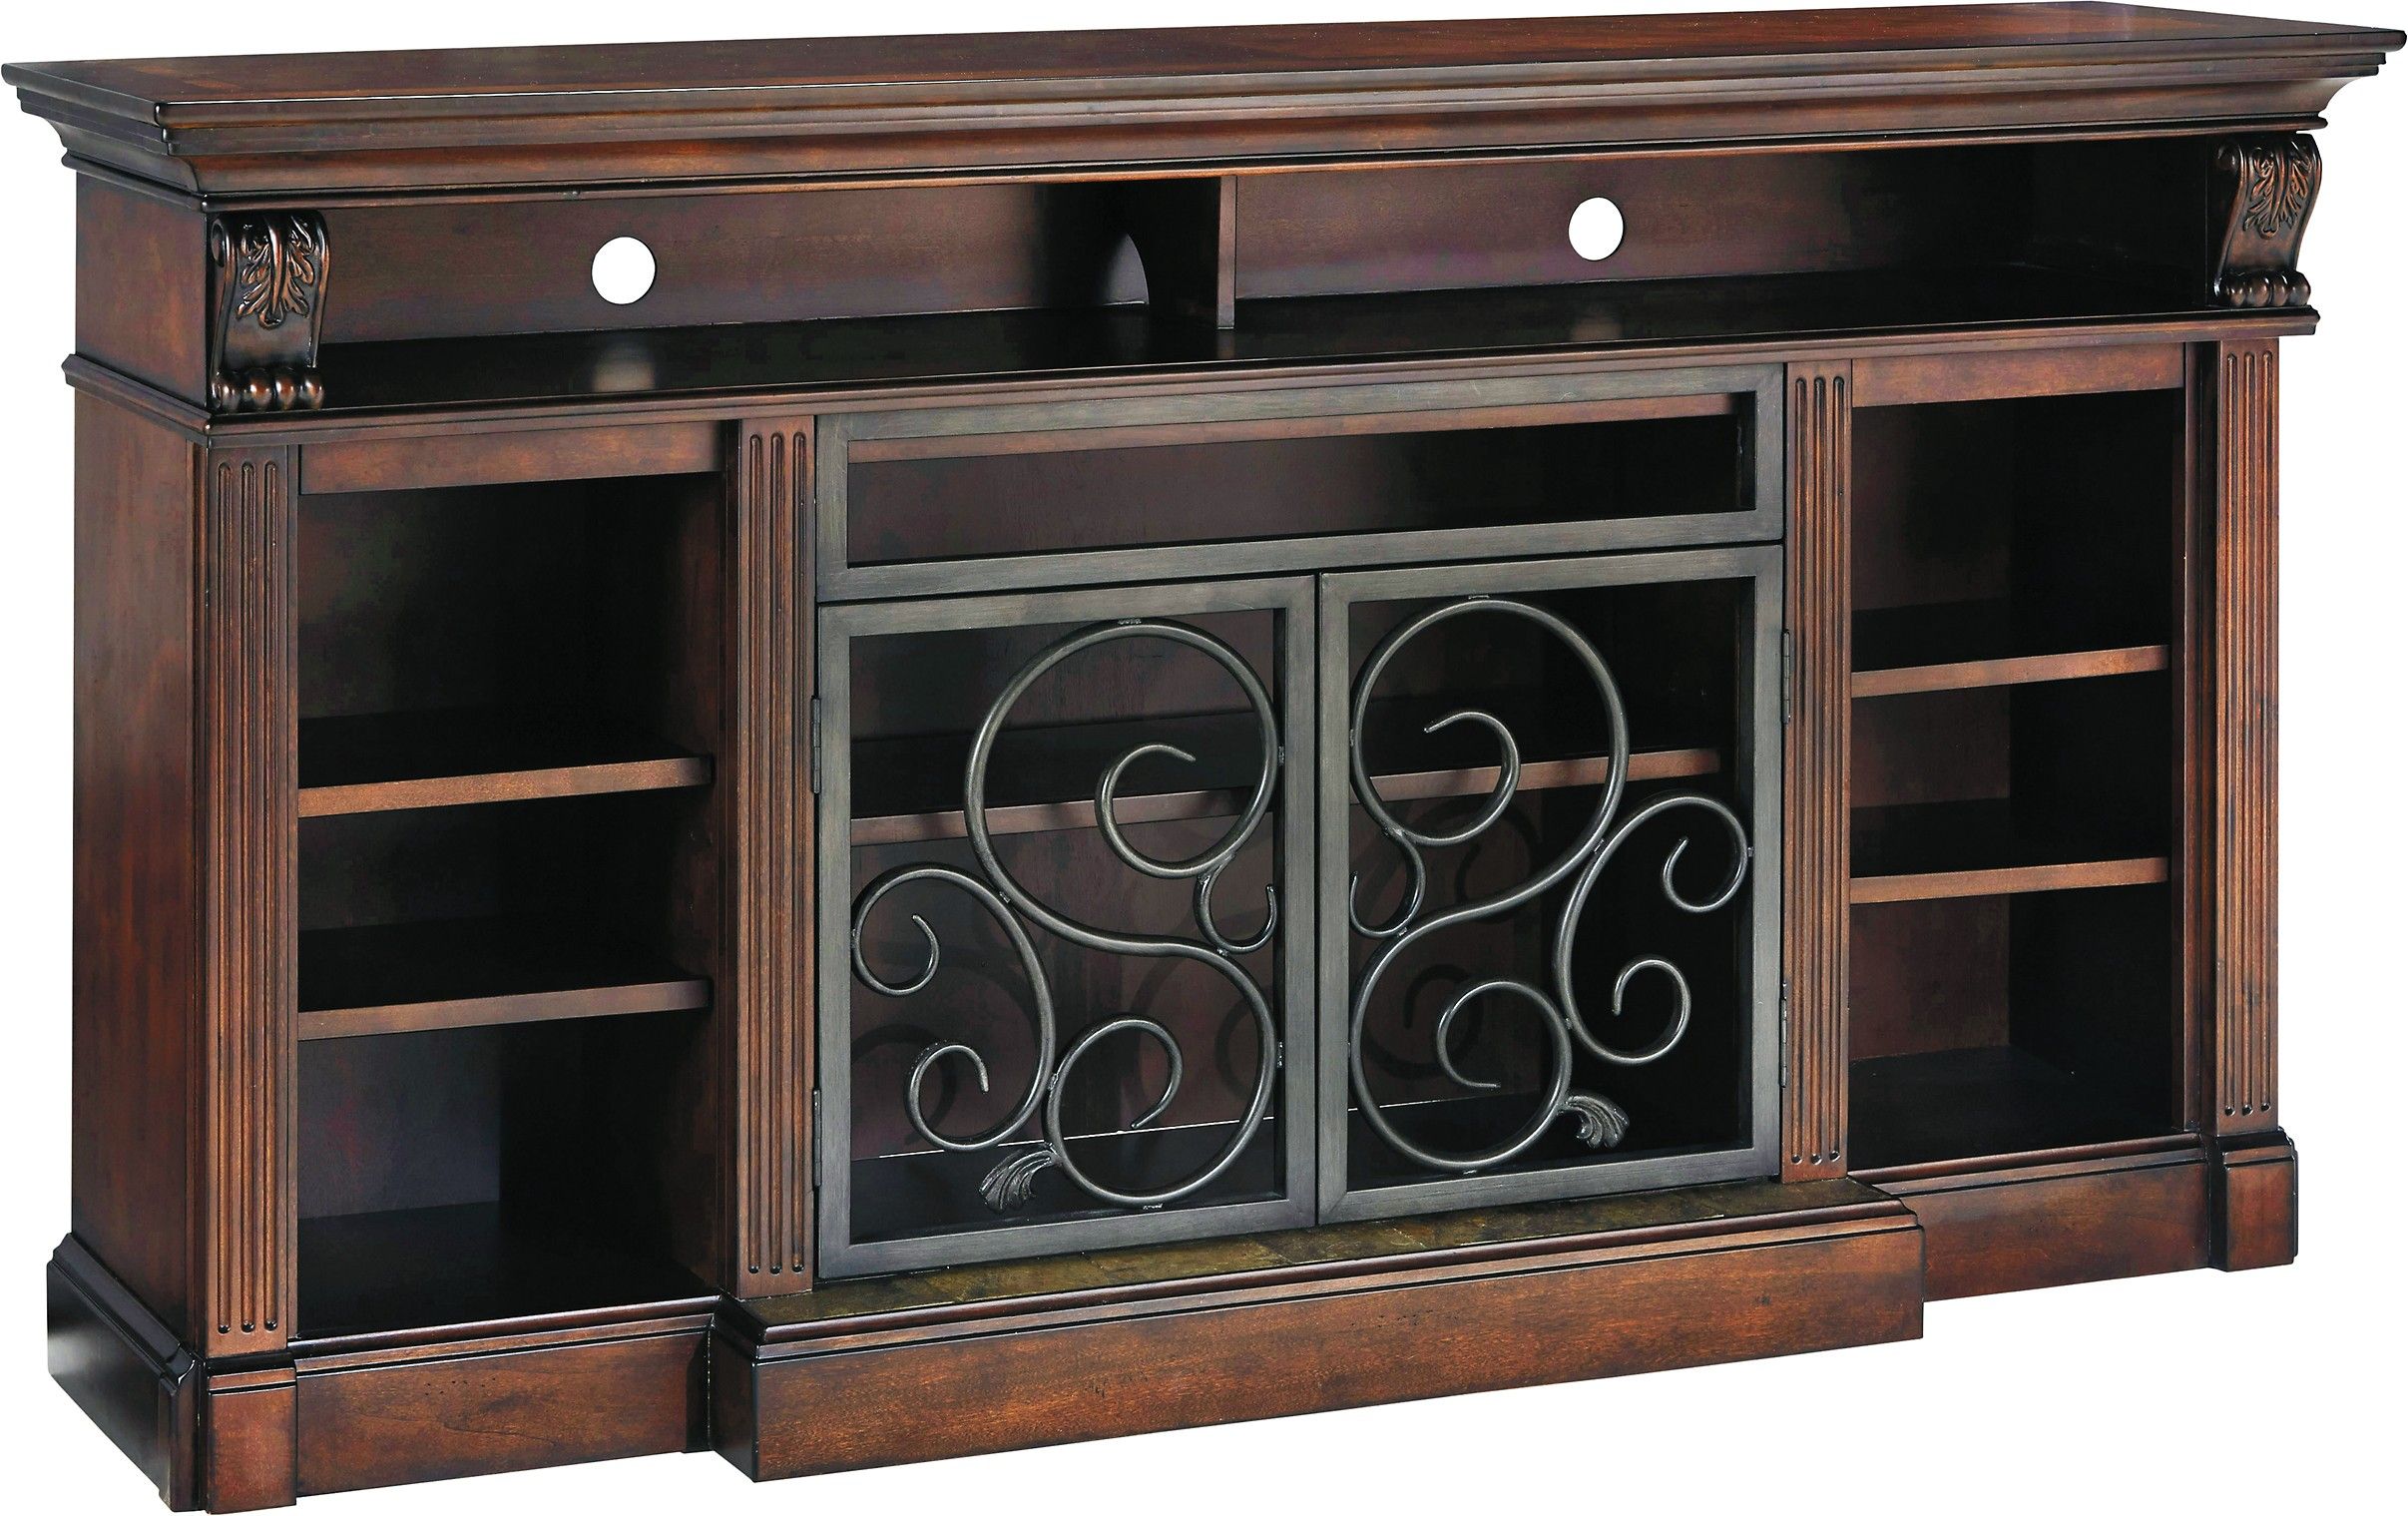 72 Inch Tv Stand with Fireplace Lovely ashley Alymere W669 88 Signature Design 72" X Large Tv Stand